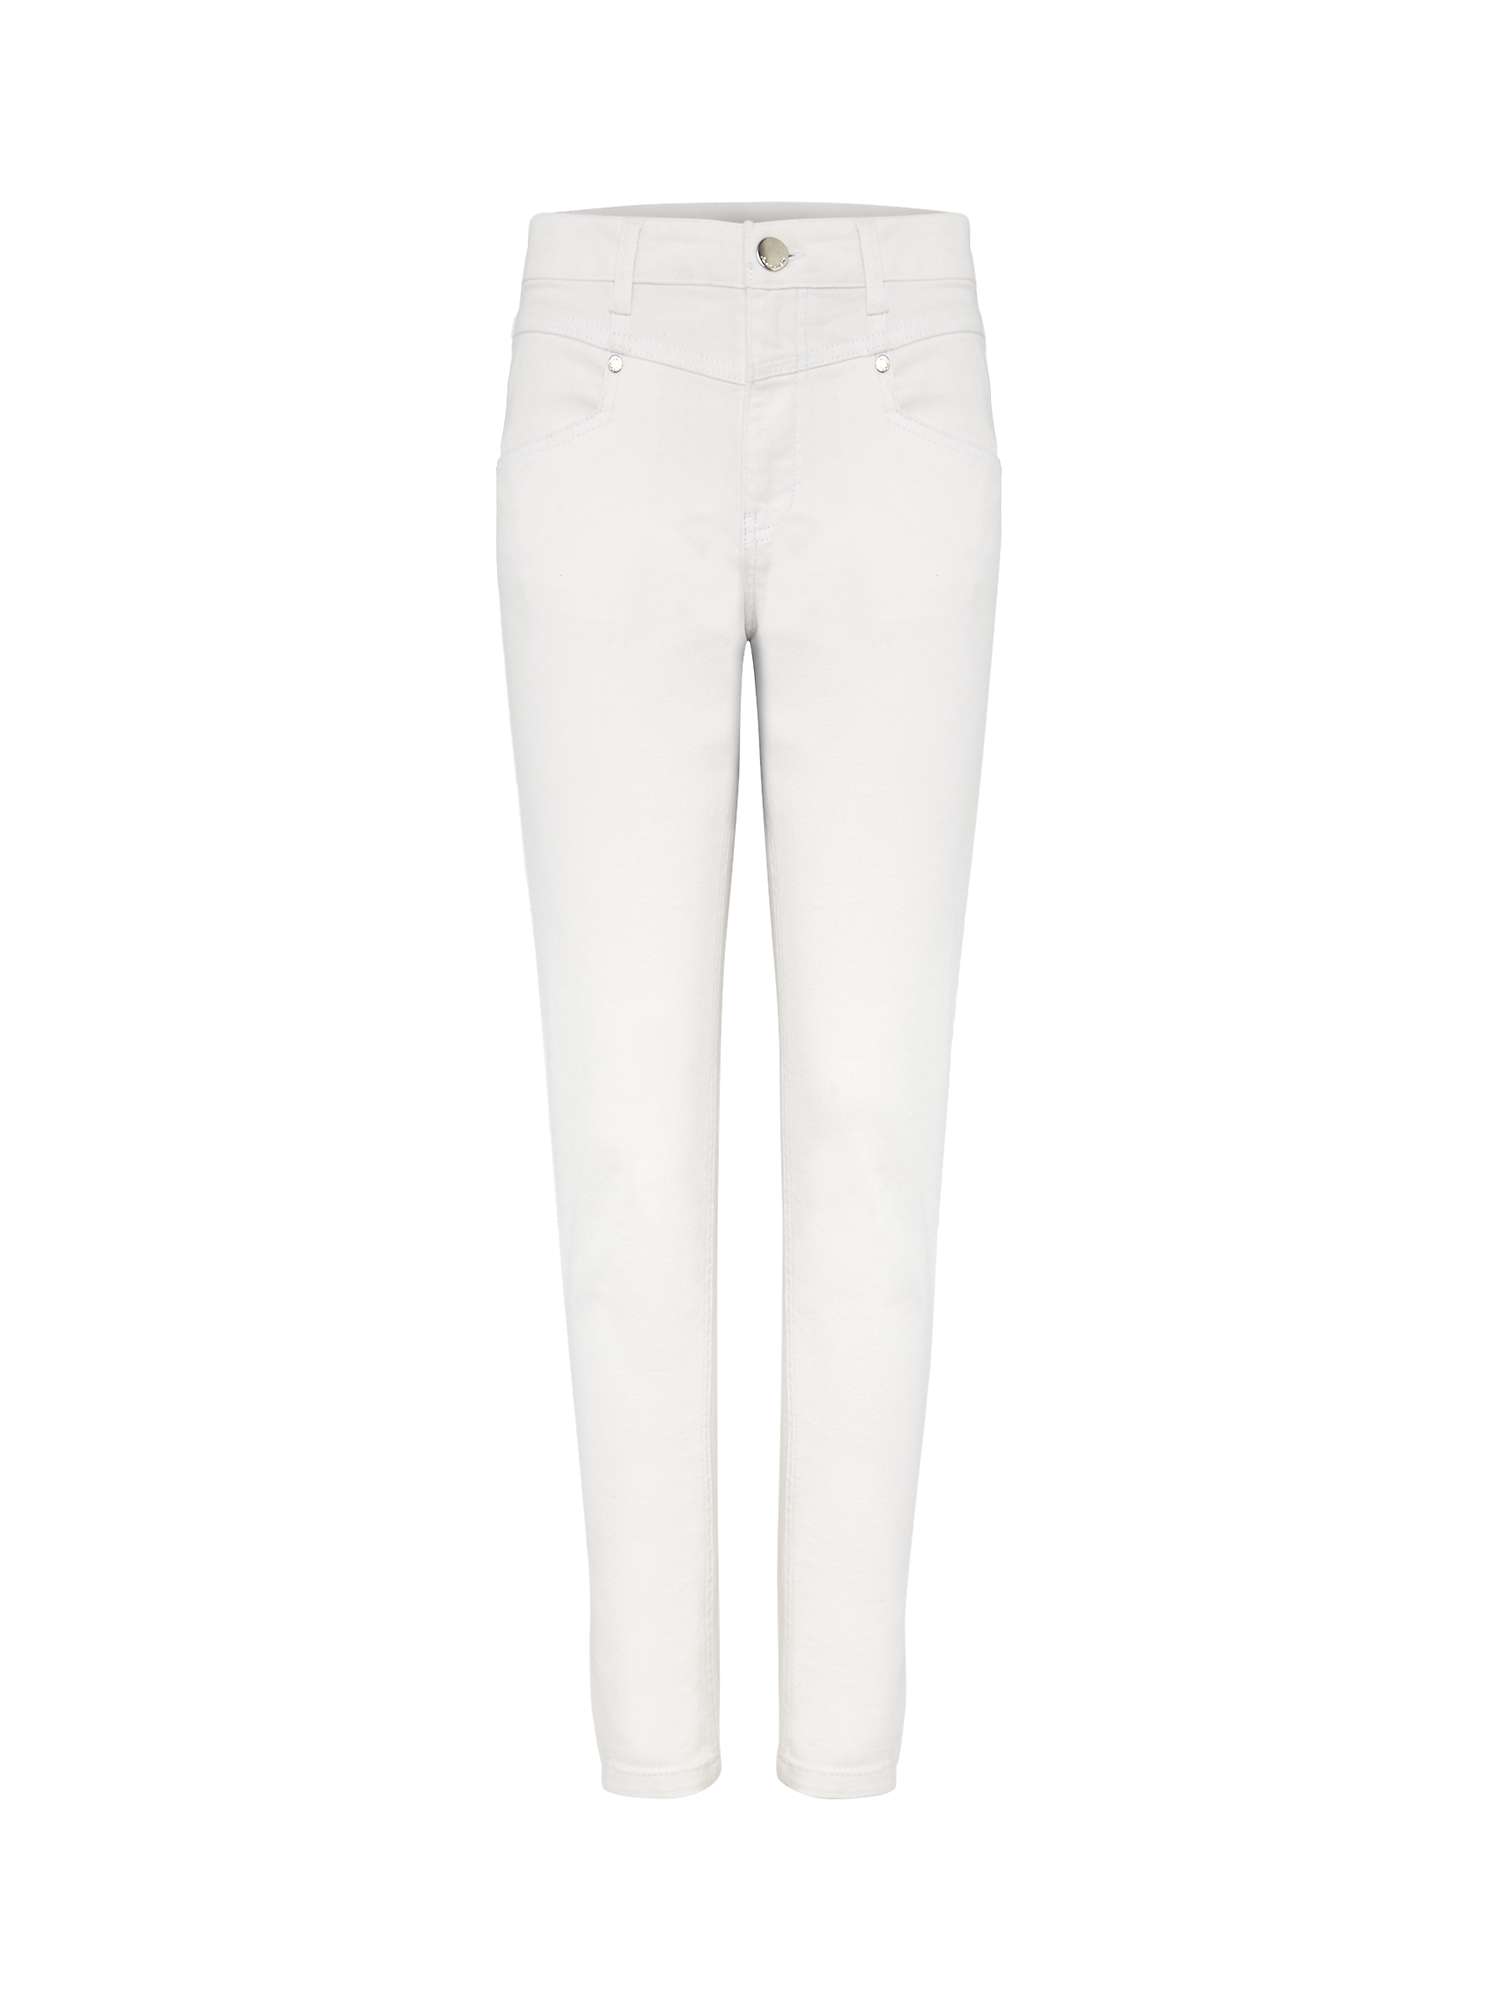 Phase Eight Hailee Topstitch Detail Cropped Jeans, White at John Lewis ...